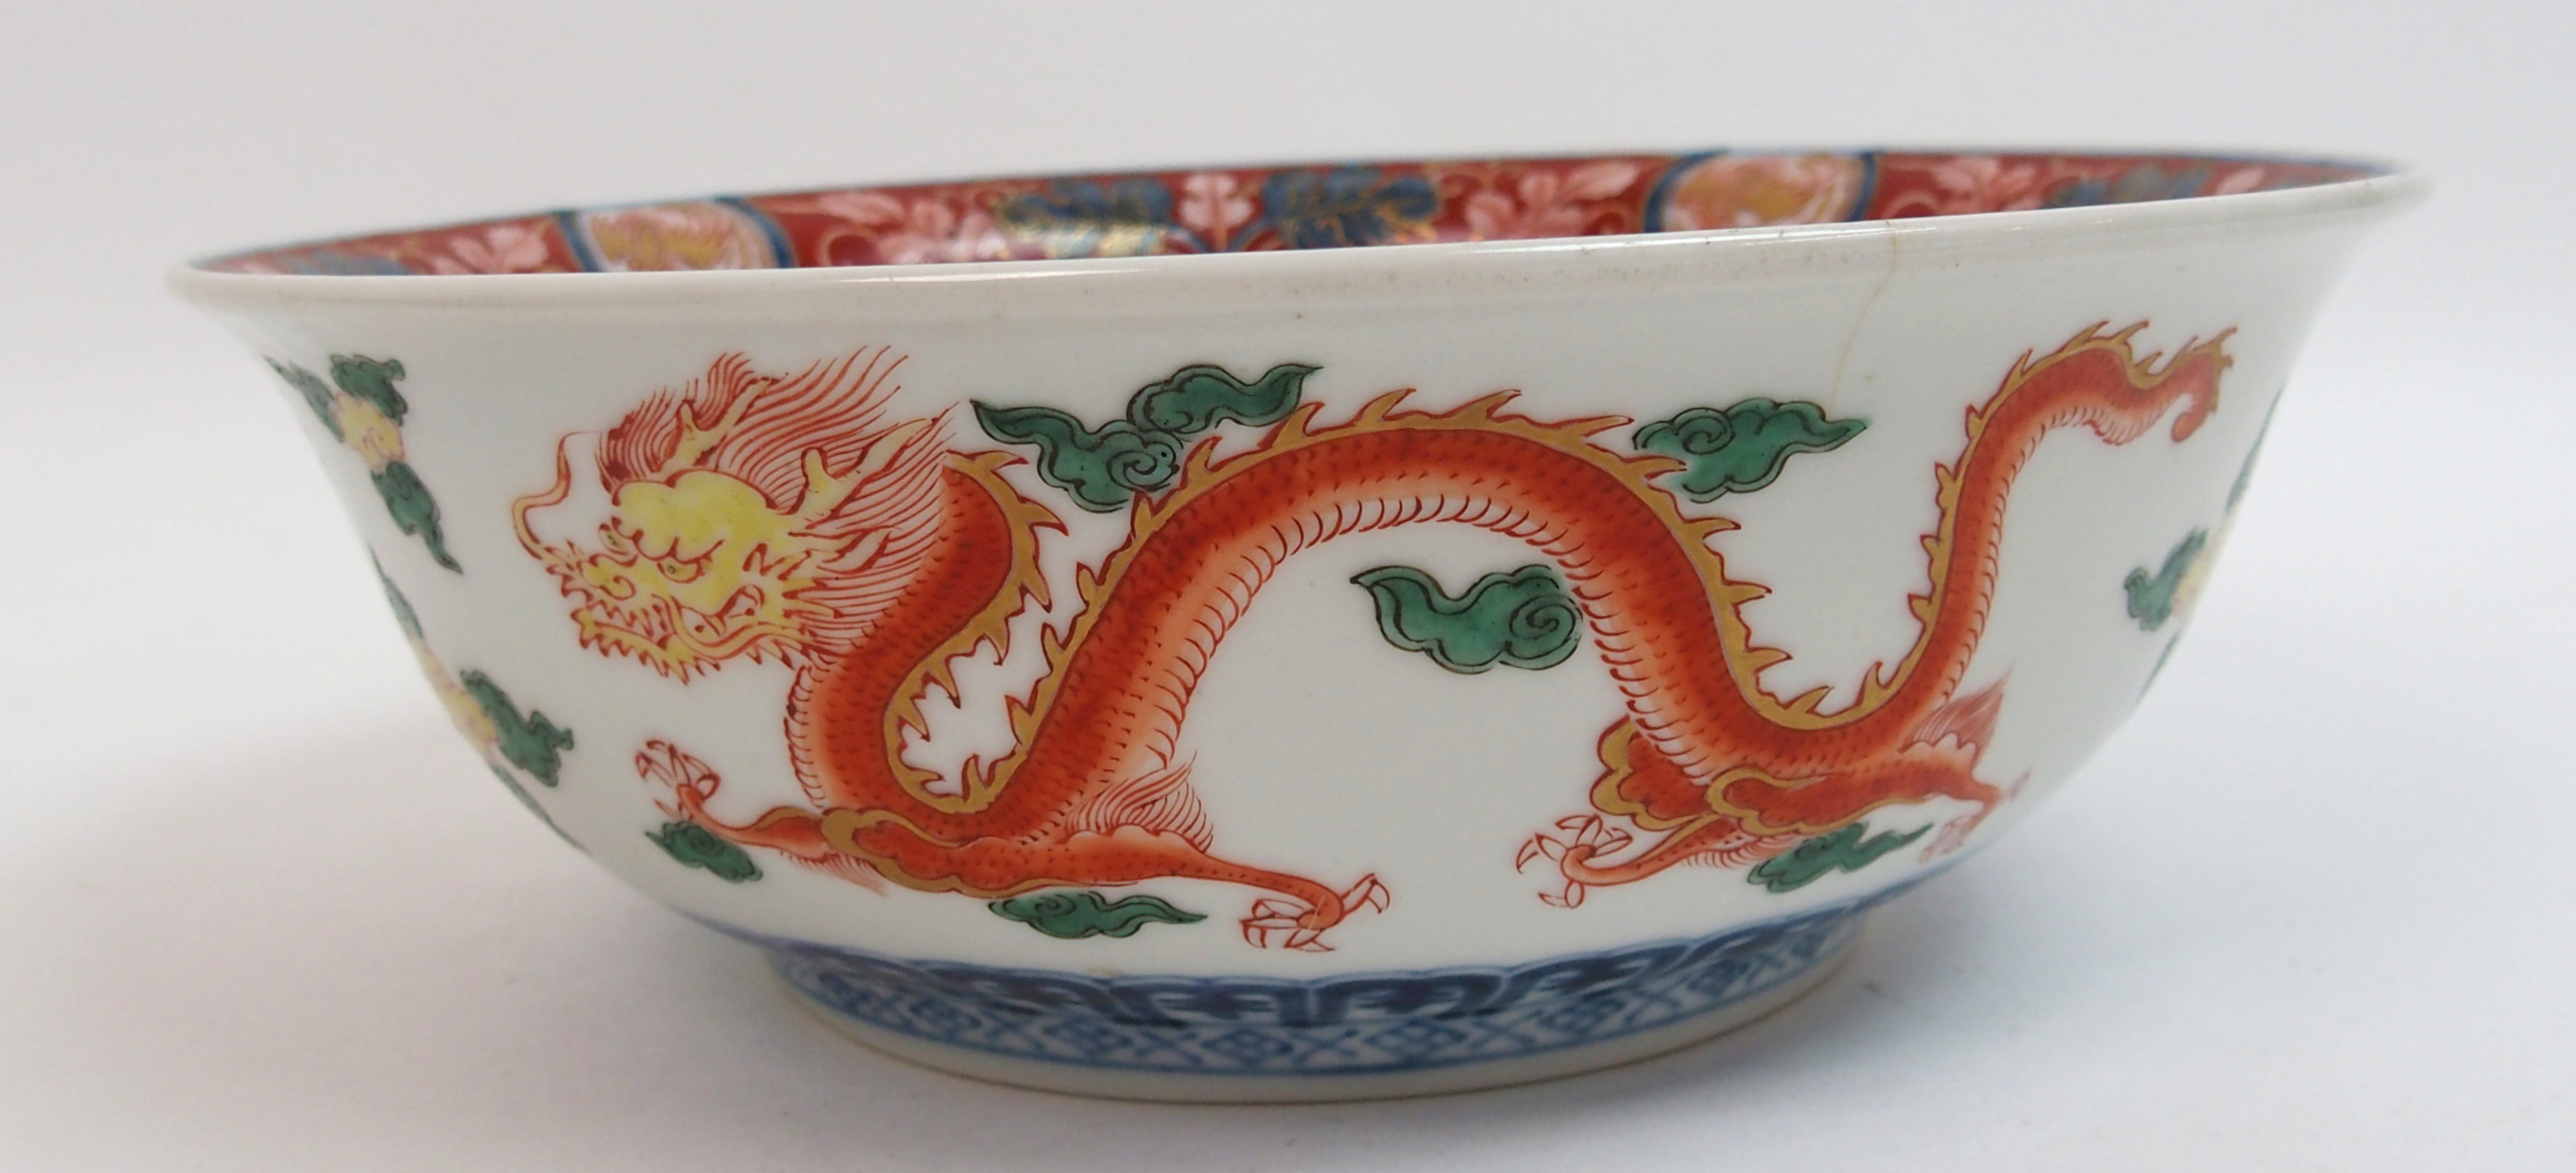 An Imari bowl painted with a kylin surrounded by gilt dragon roundels, diaper, trellis and cloud - Image 7 of 10